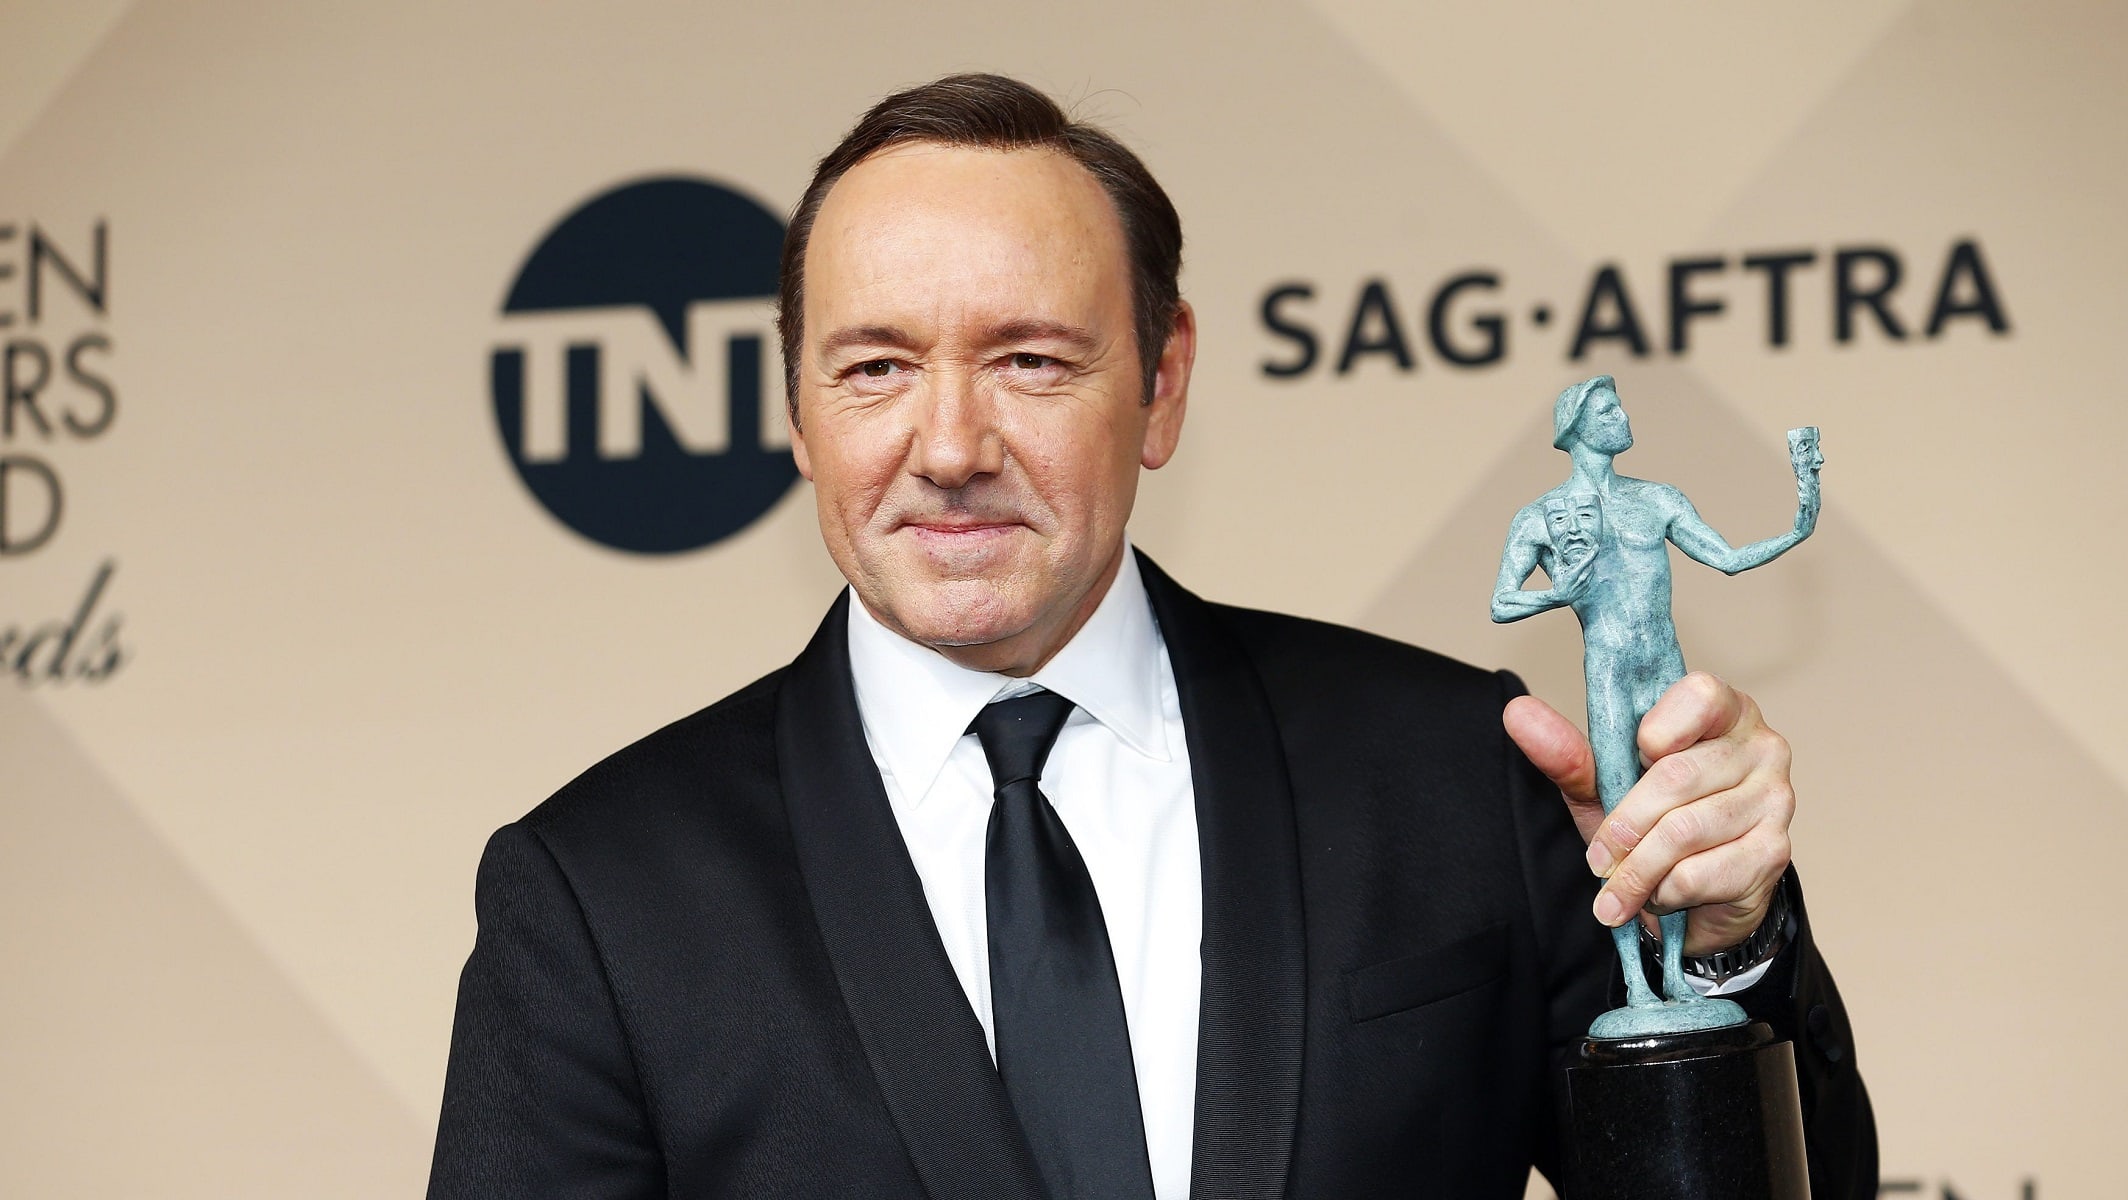 Kevin Spacey Net Worth